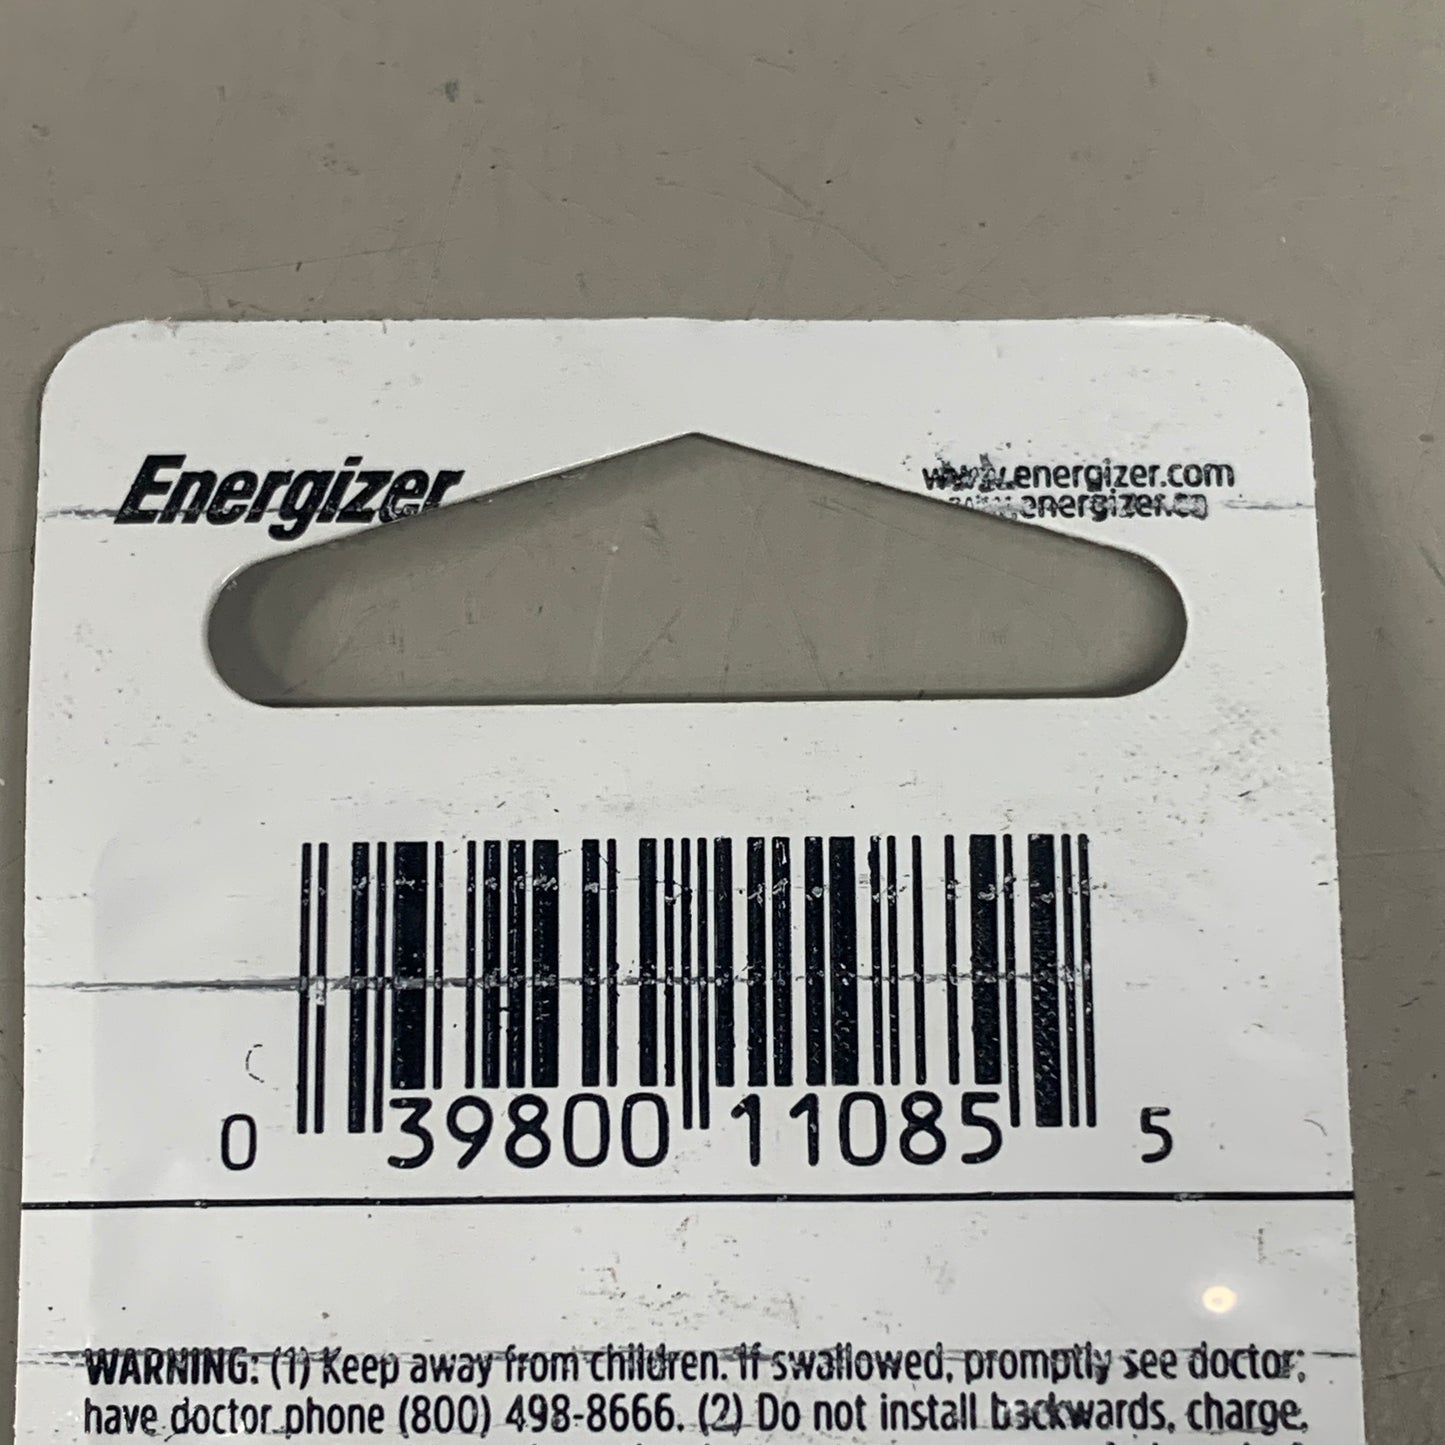 ENERGIZER (4 PACK) Silver Oxide Button Battery 392 1 Pack (4 Total Batteries) 392BPZ